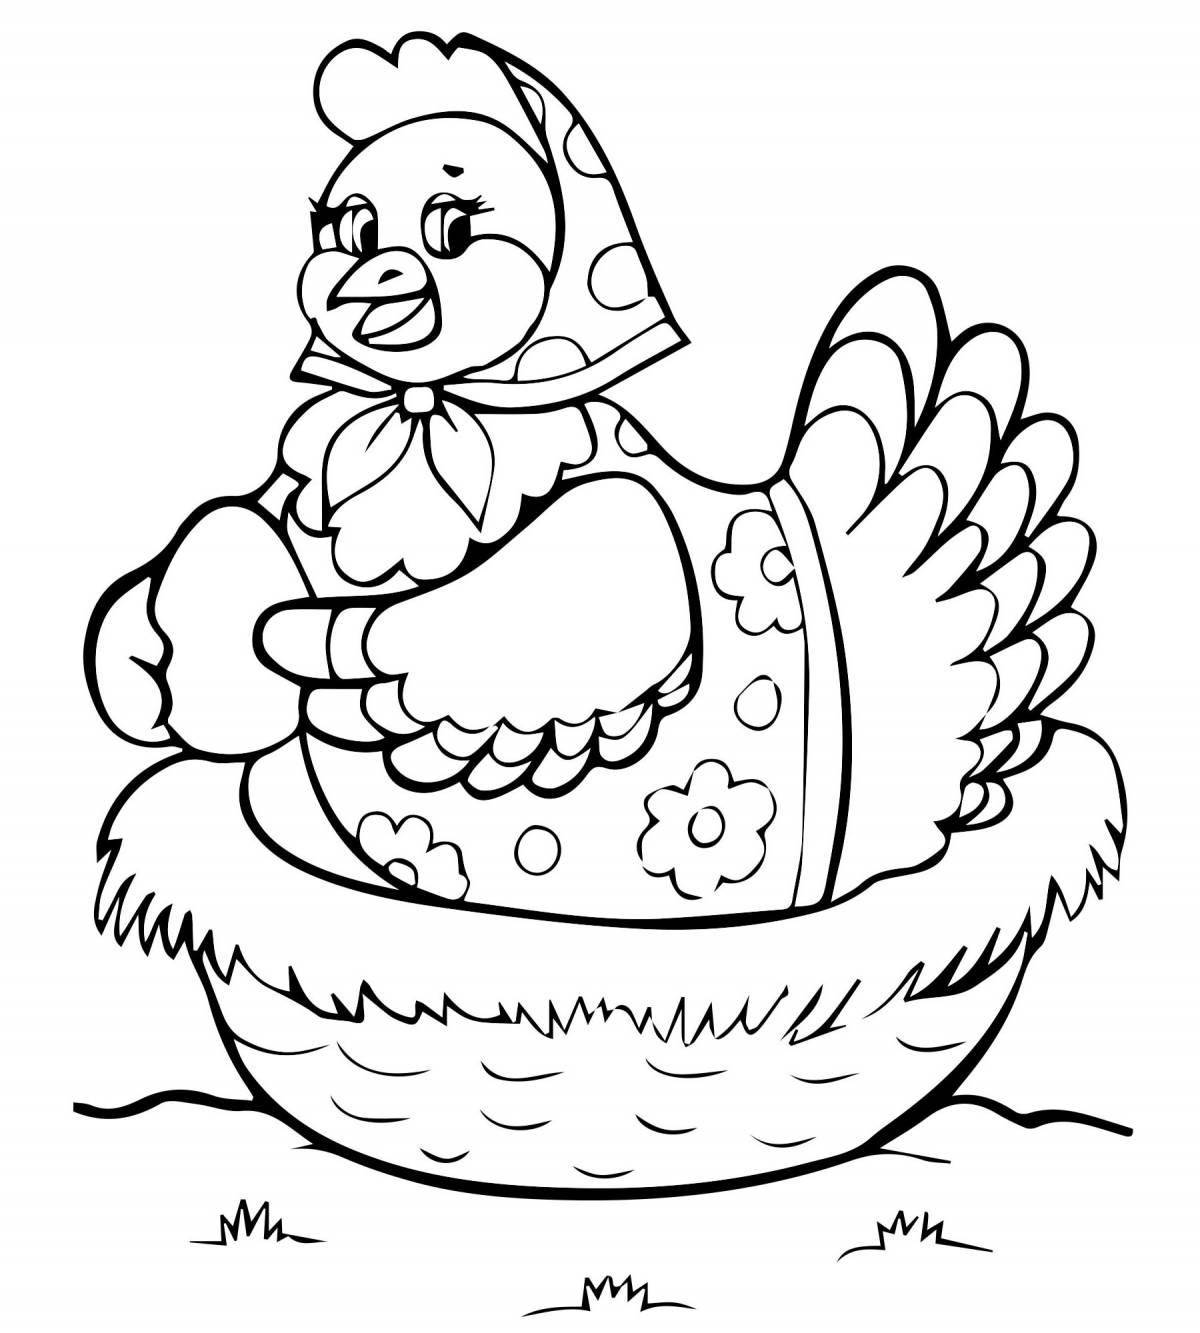 A funny coloring book from Russian folk tales